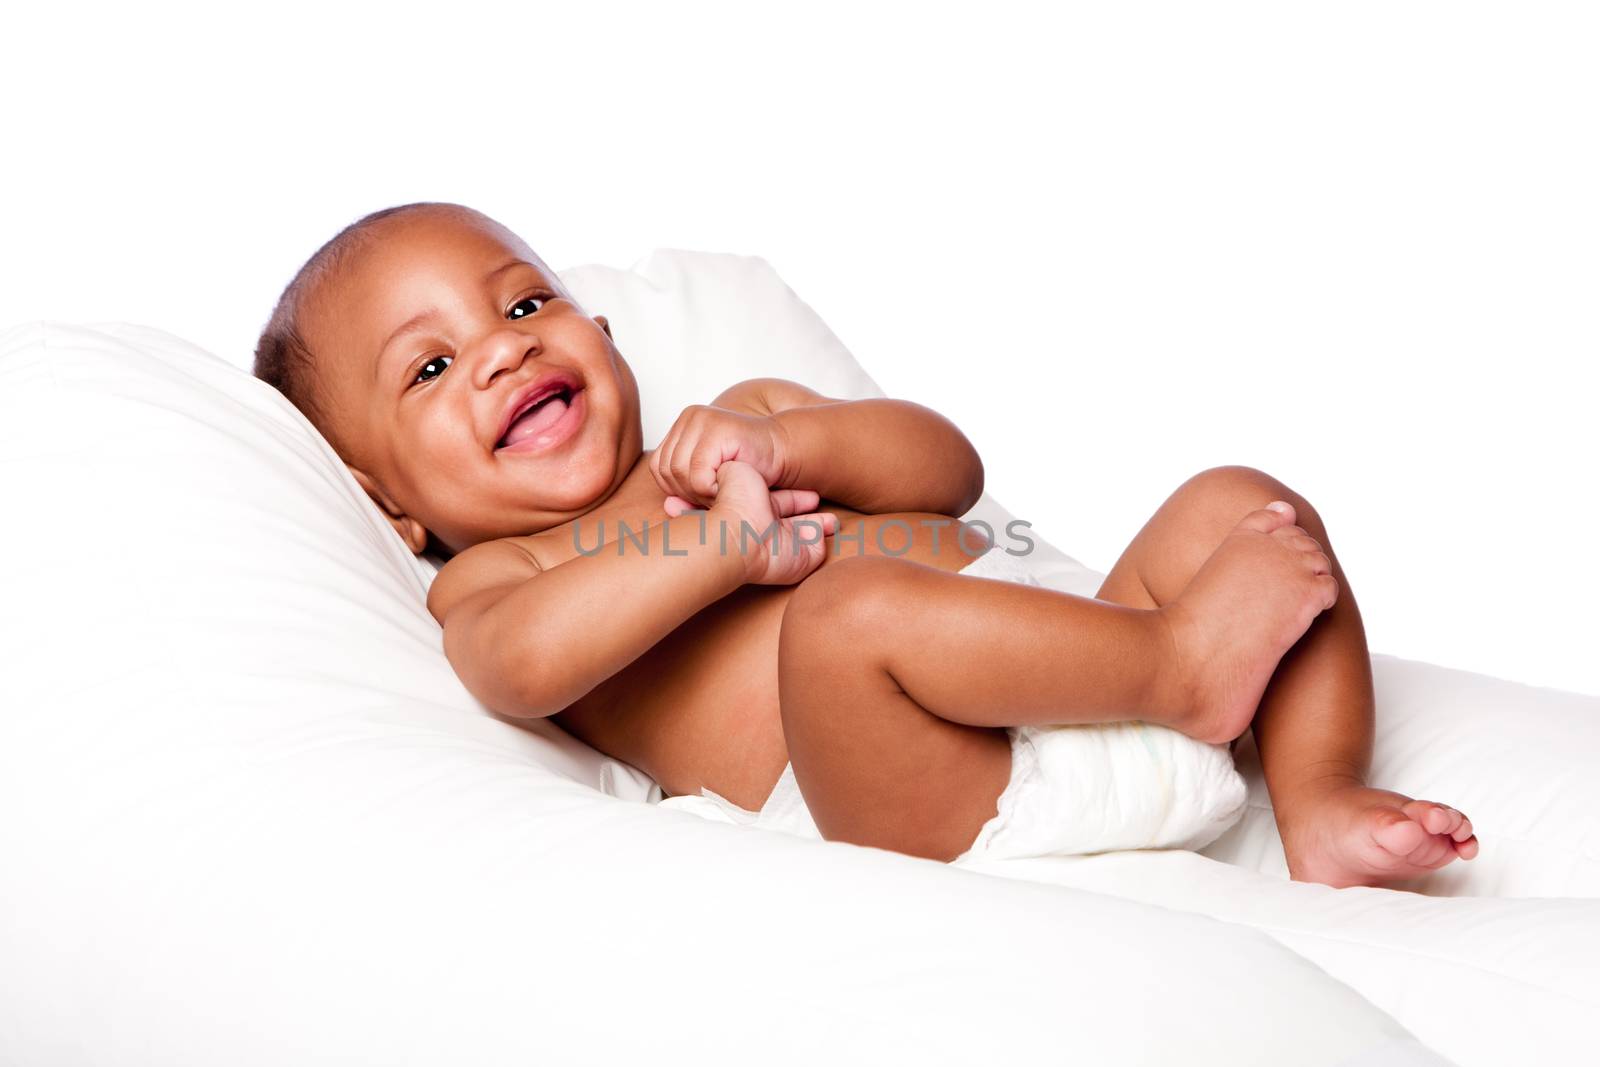 Happy cute smiling laughing African baby infant laying wearing diapers on soft bed, isolated.